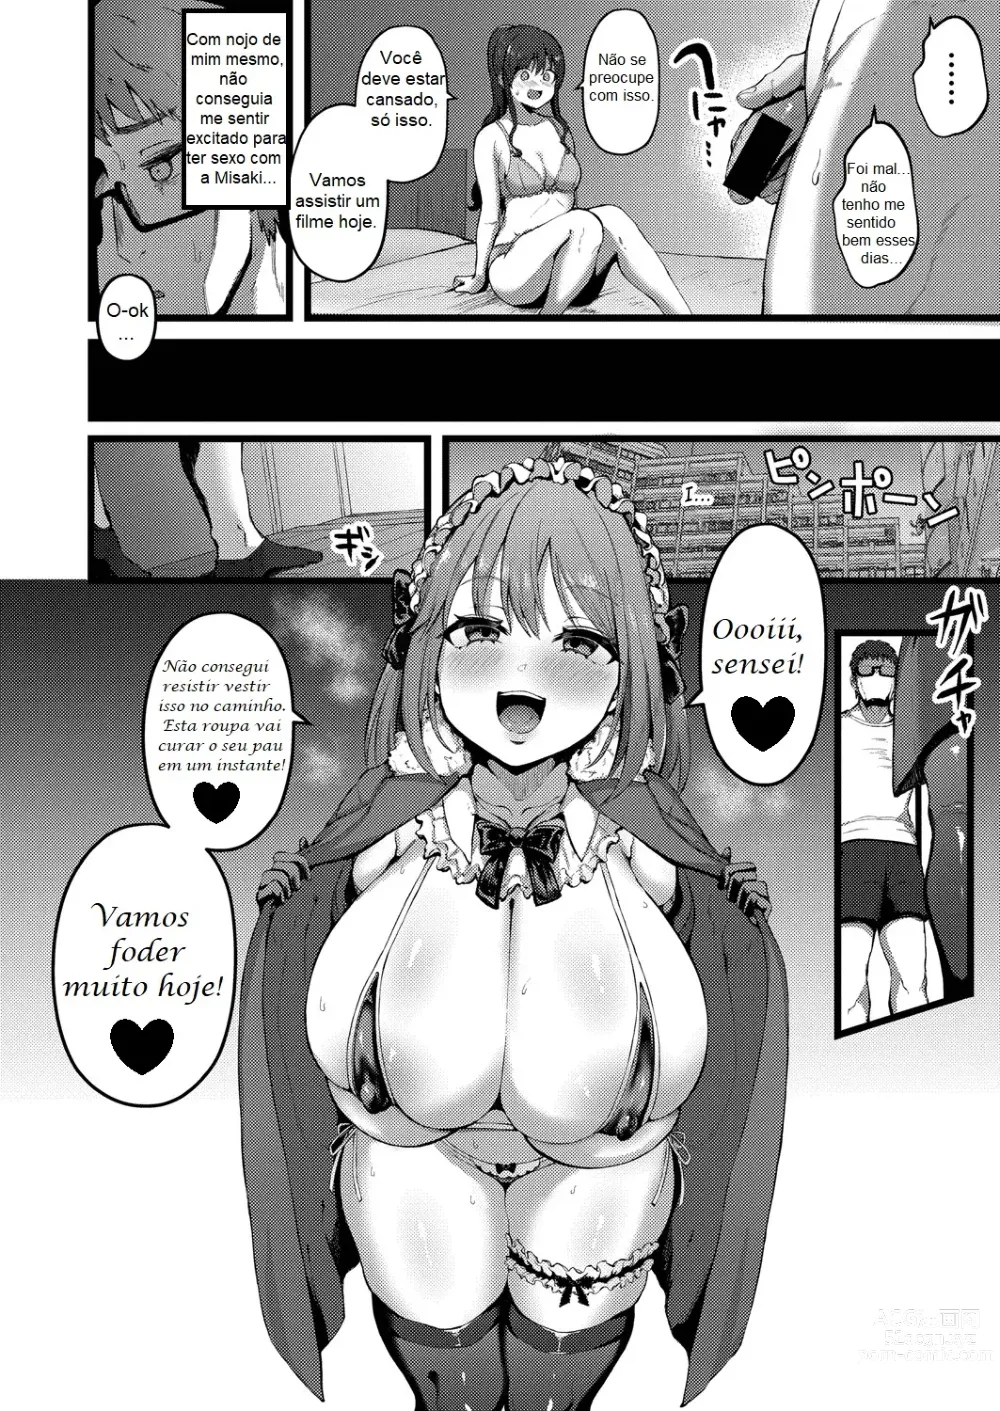 Page 16 of manga I Have A Girlfriend, So I Won't Be Tempted by My Short, M-cup, Sugary Bully Student's Advances.